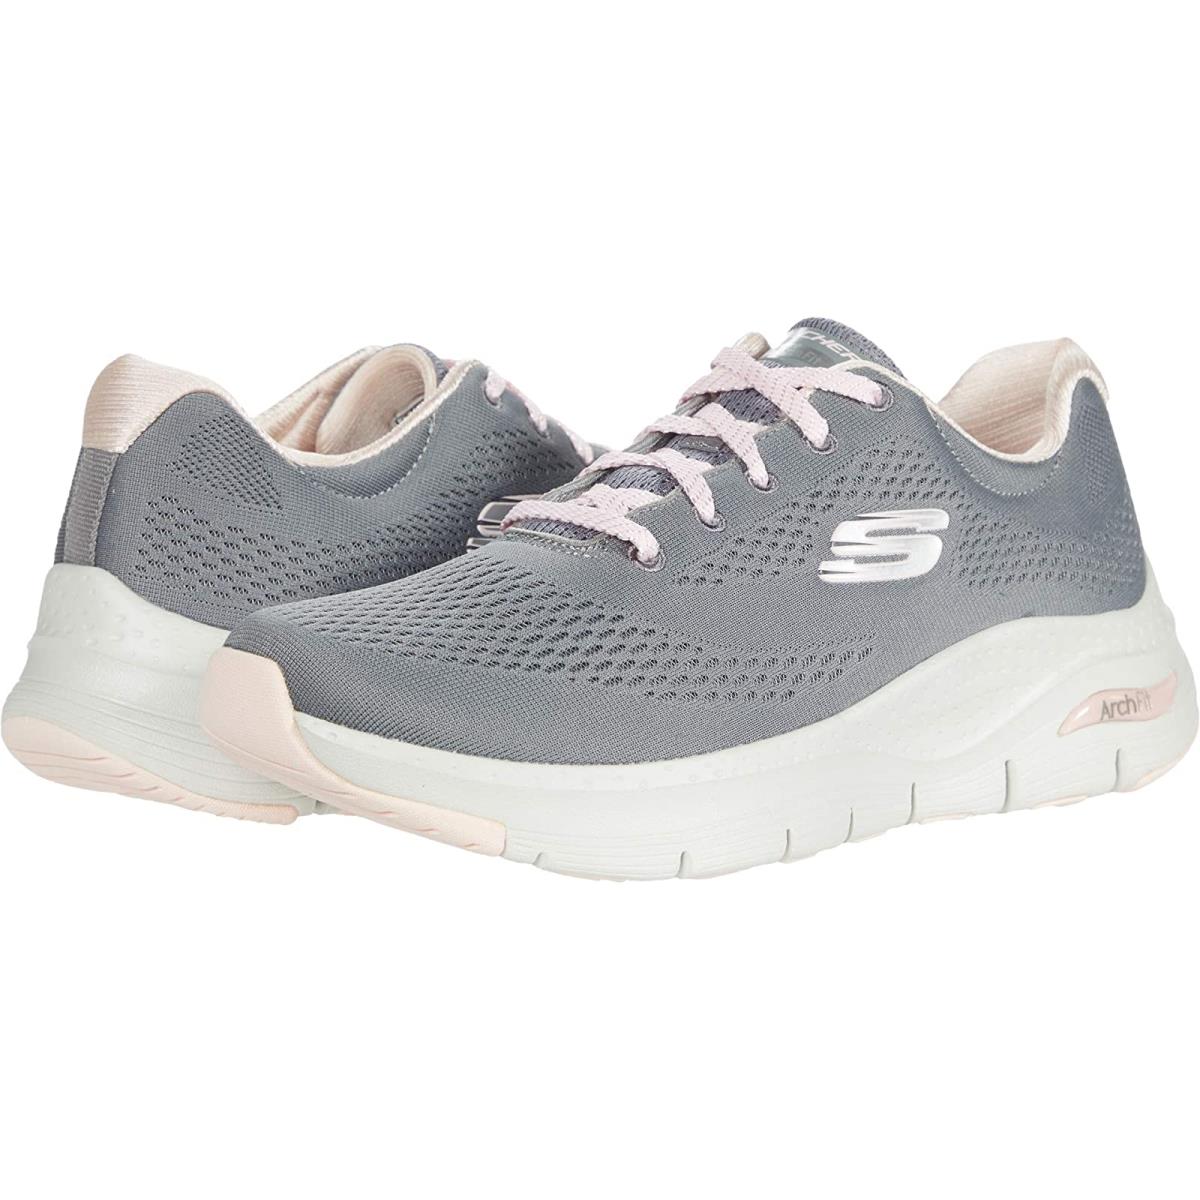 Woman`s Sneakers Athletic Shoes Skechers Arch Fit - Big Appeal Grey/Pink